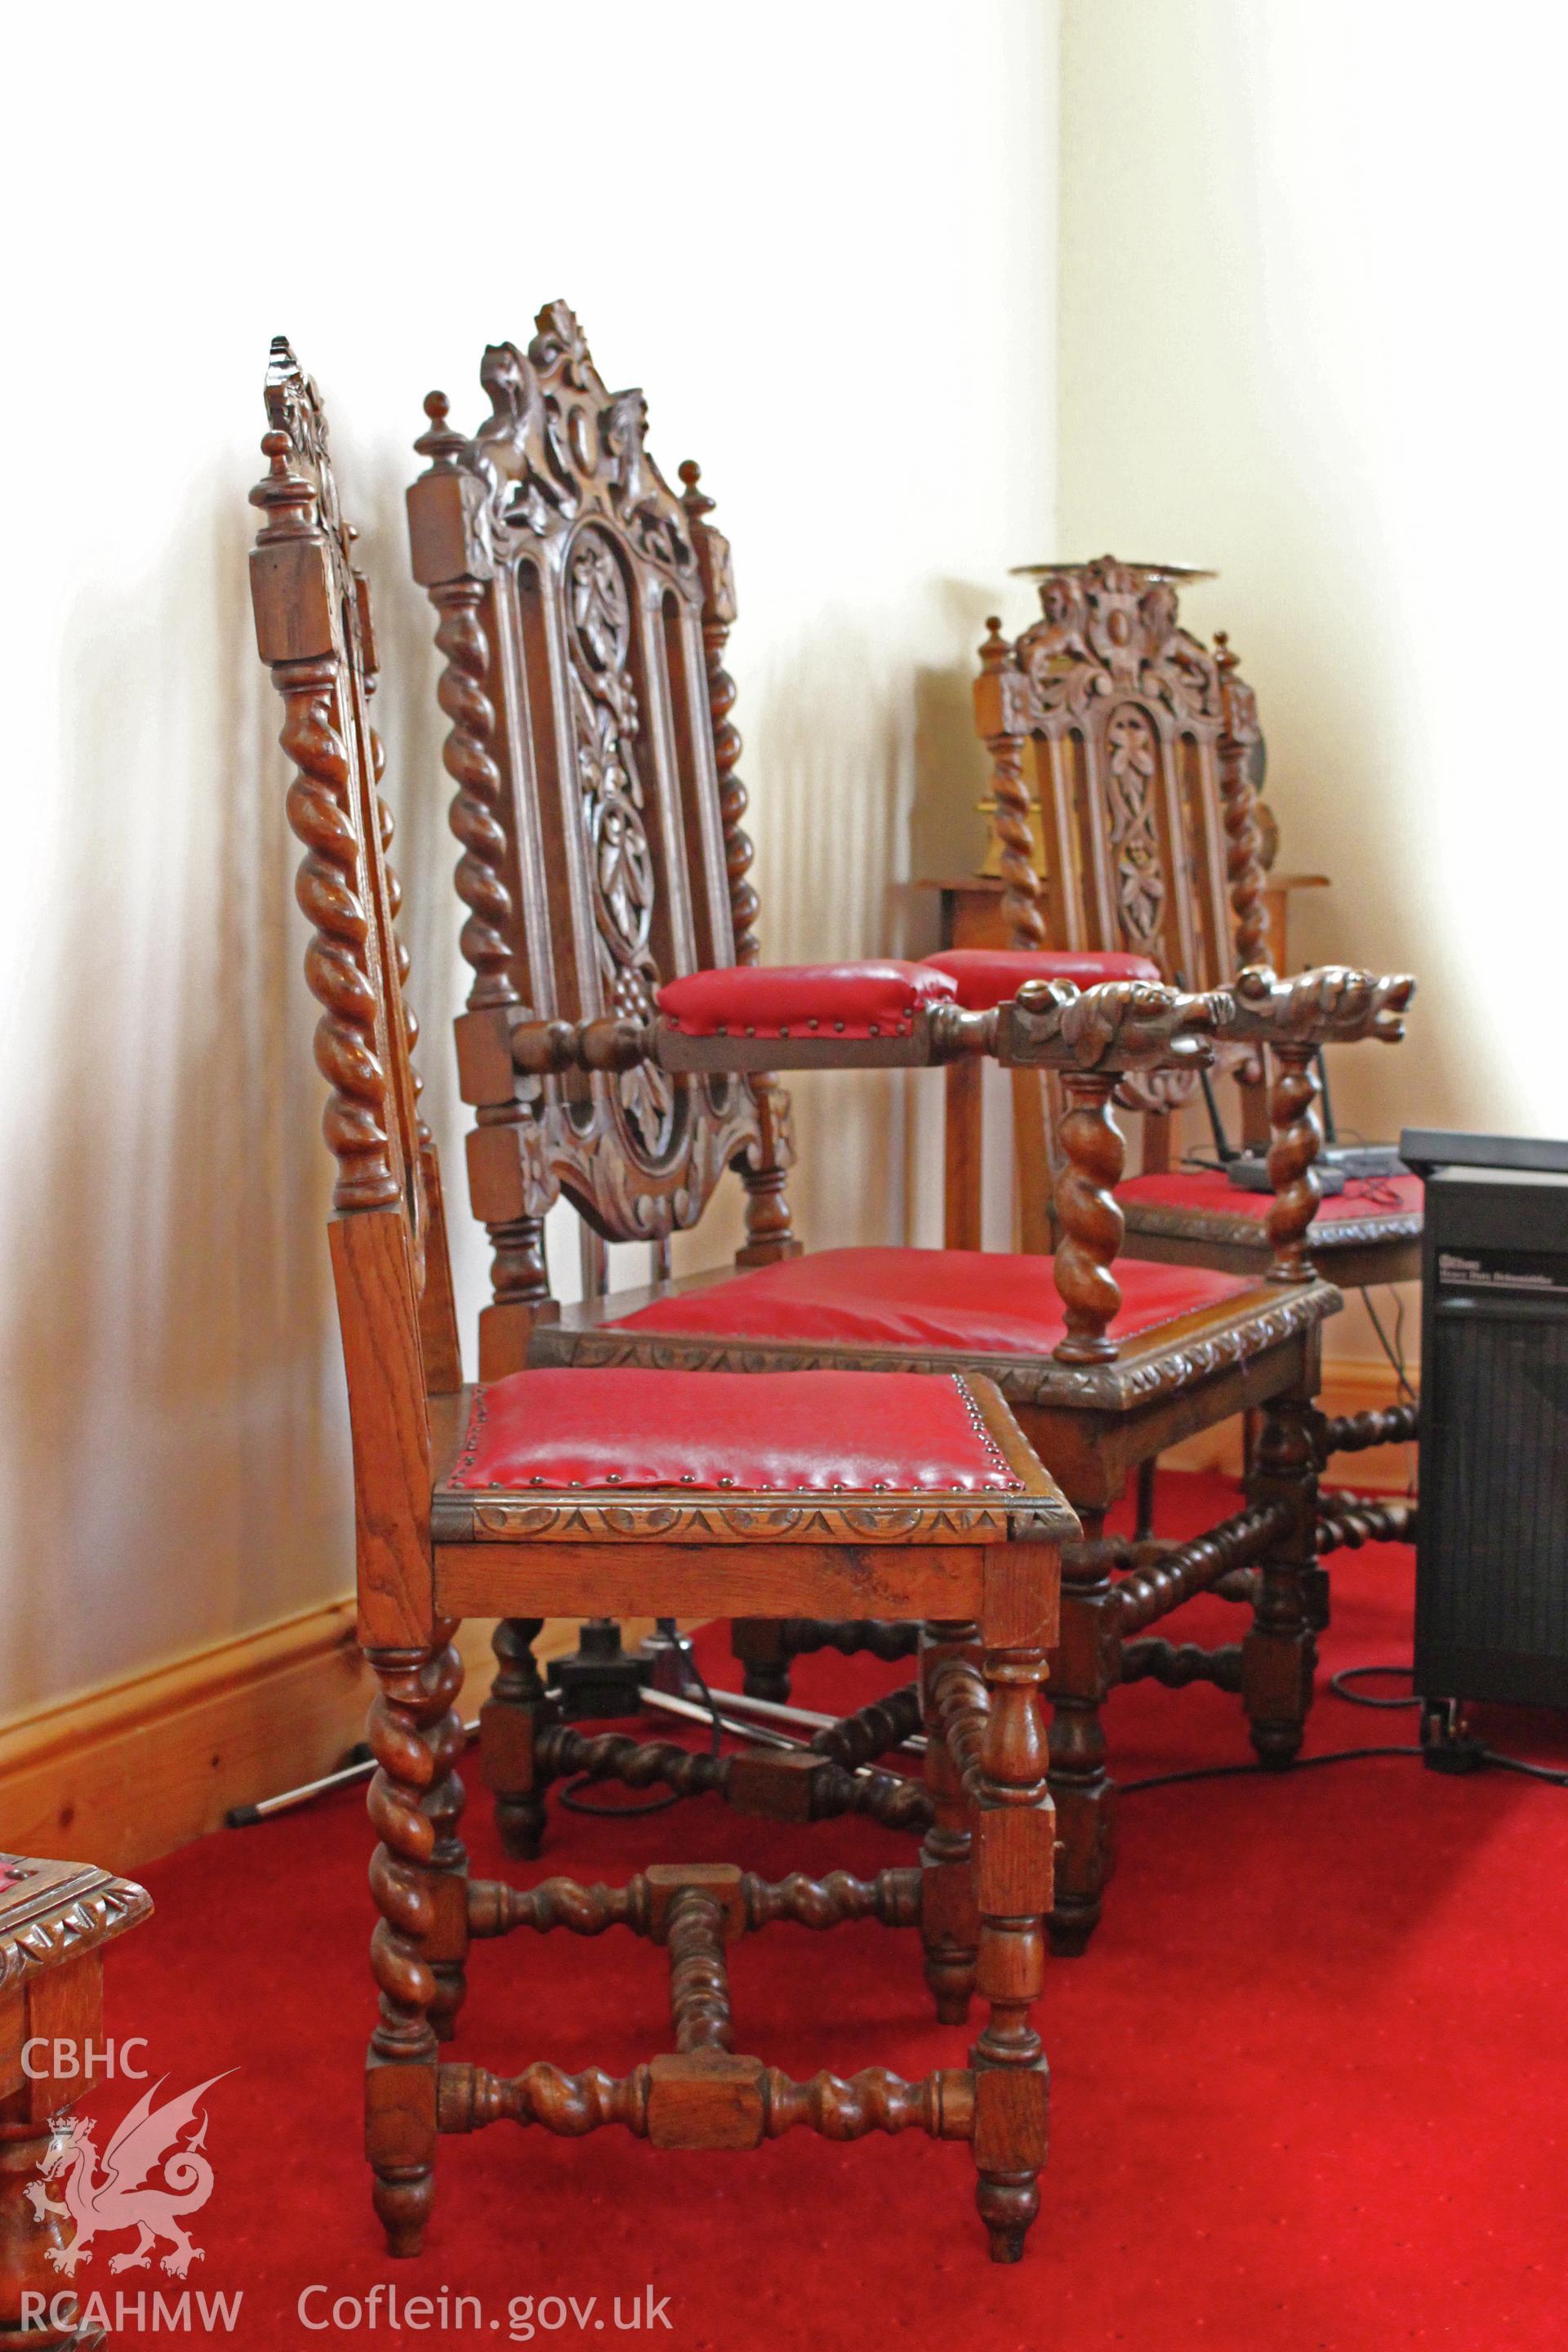 Bethel Independent Chapel, Pen-Clawdd, detail of deacons' chairs in vestry.